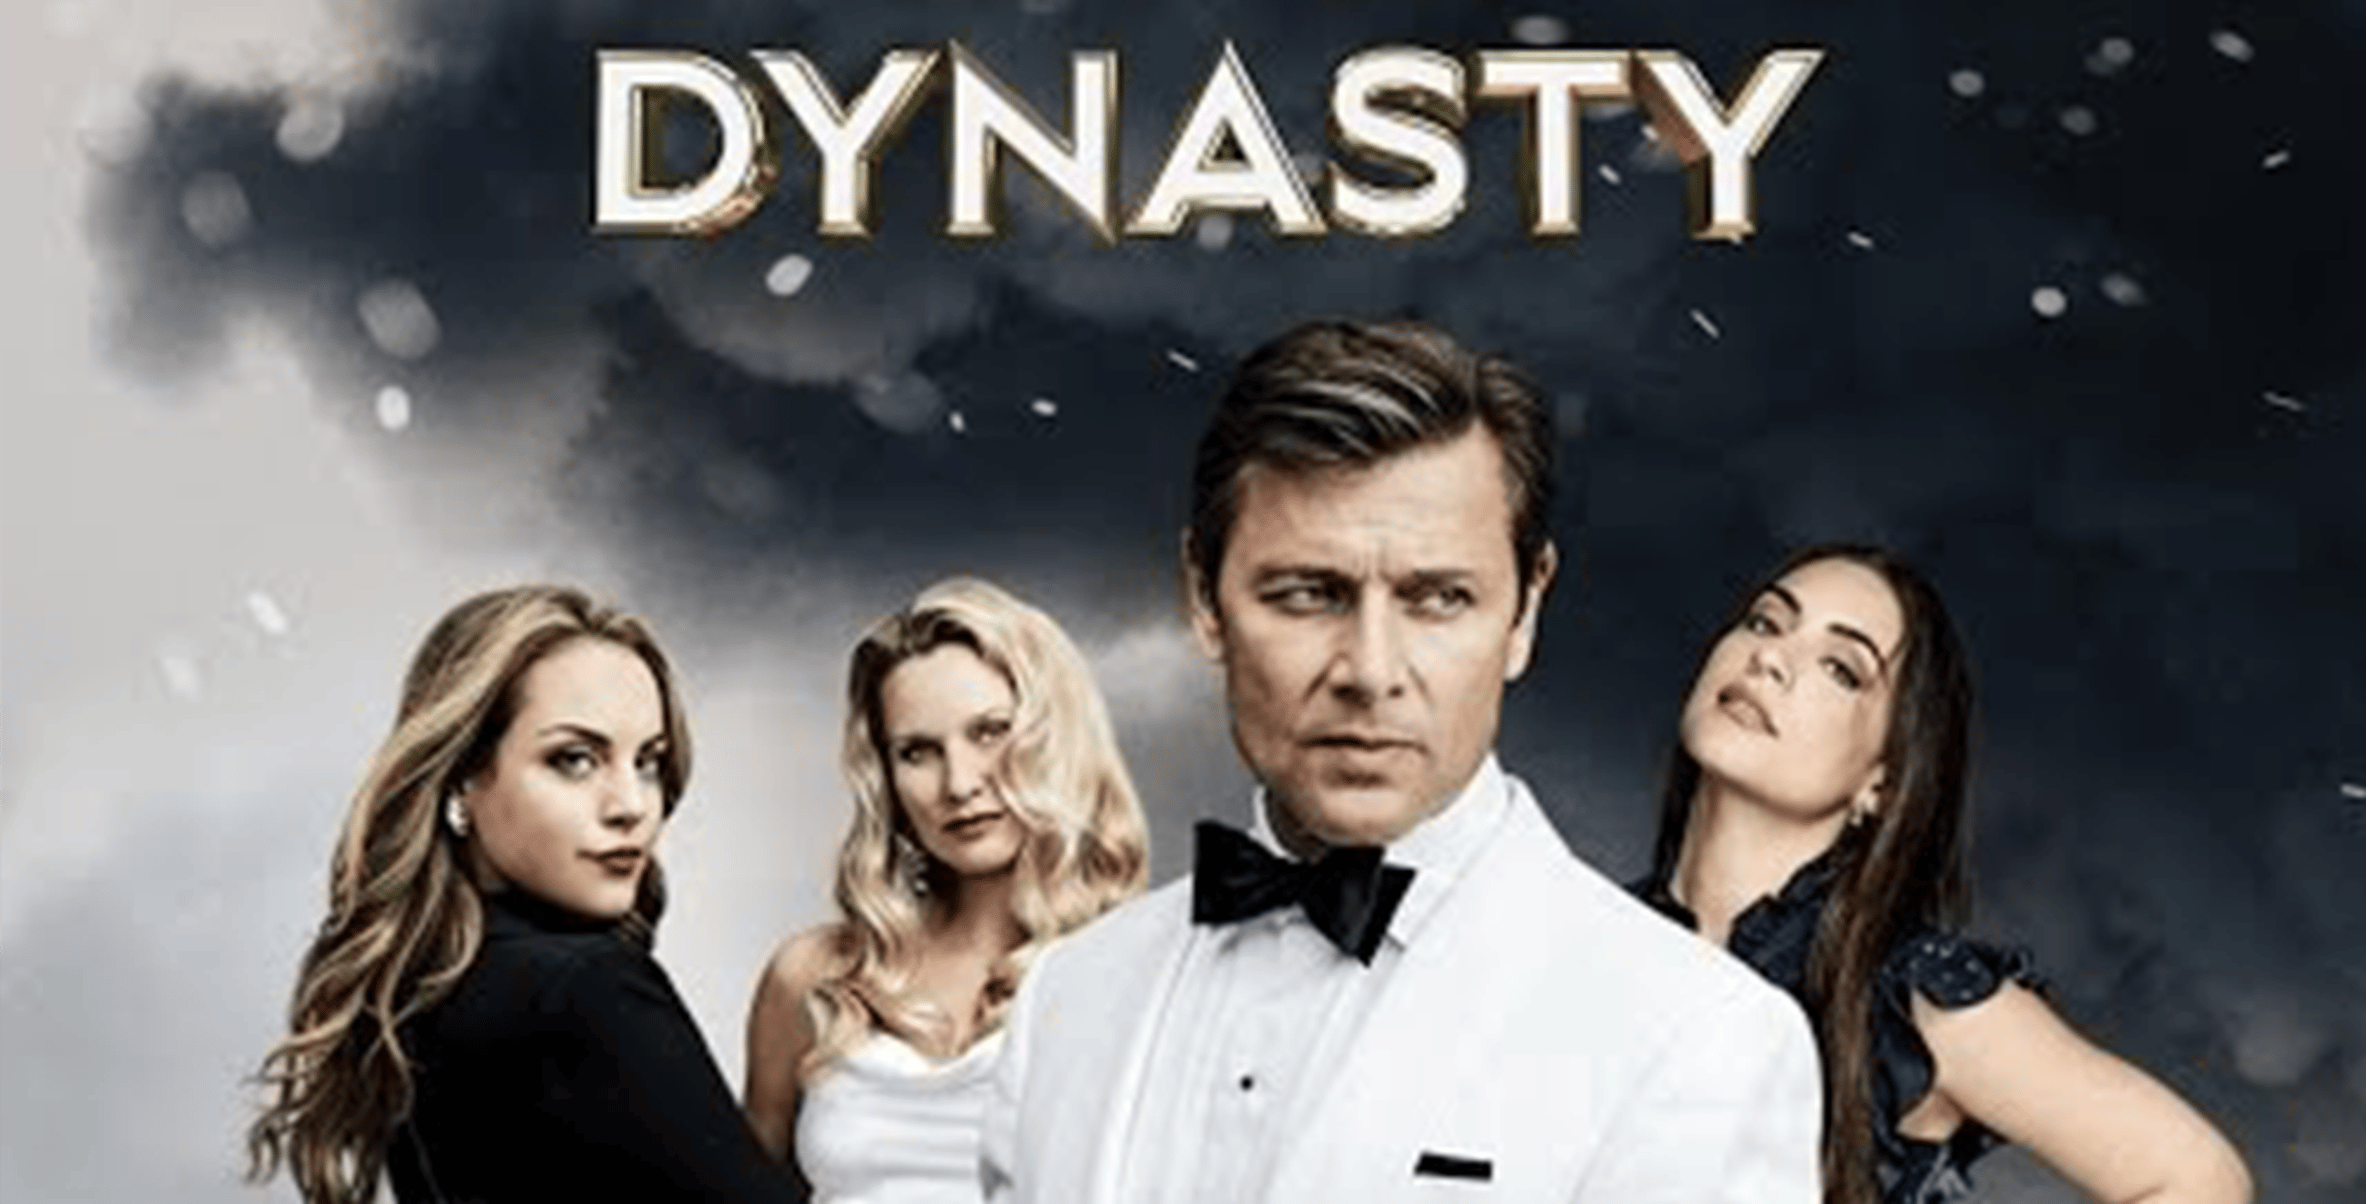 Dynasty Season 3 Is Casting For Extras